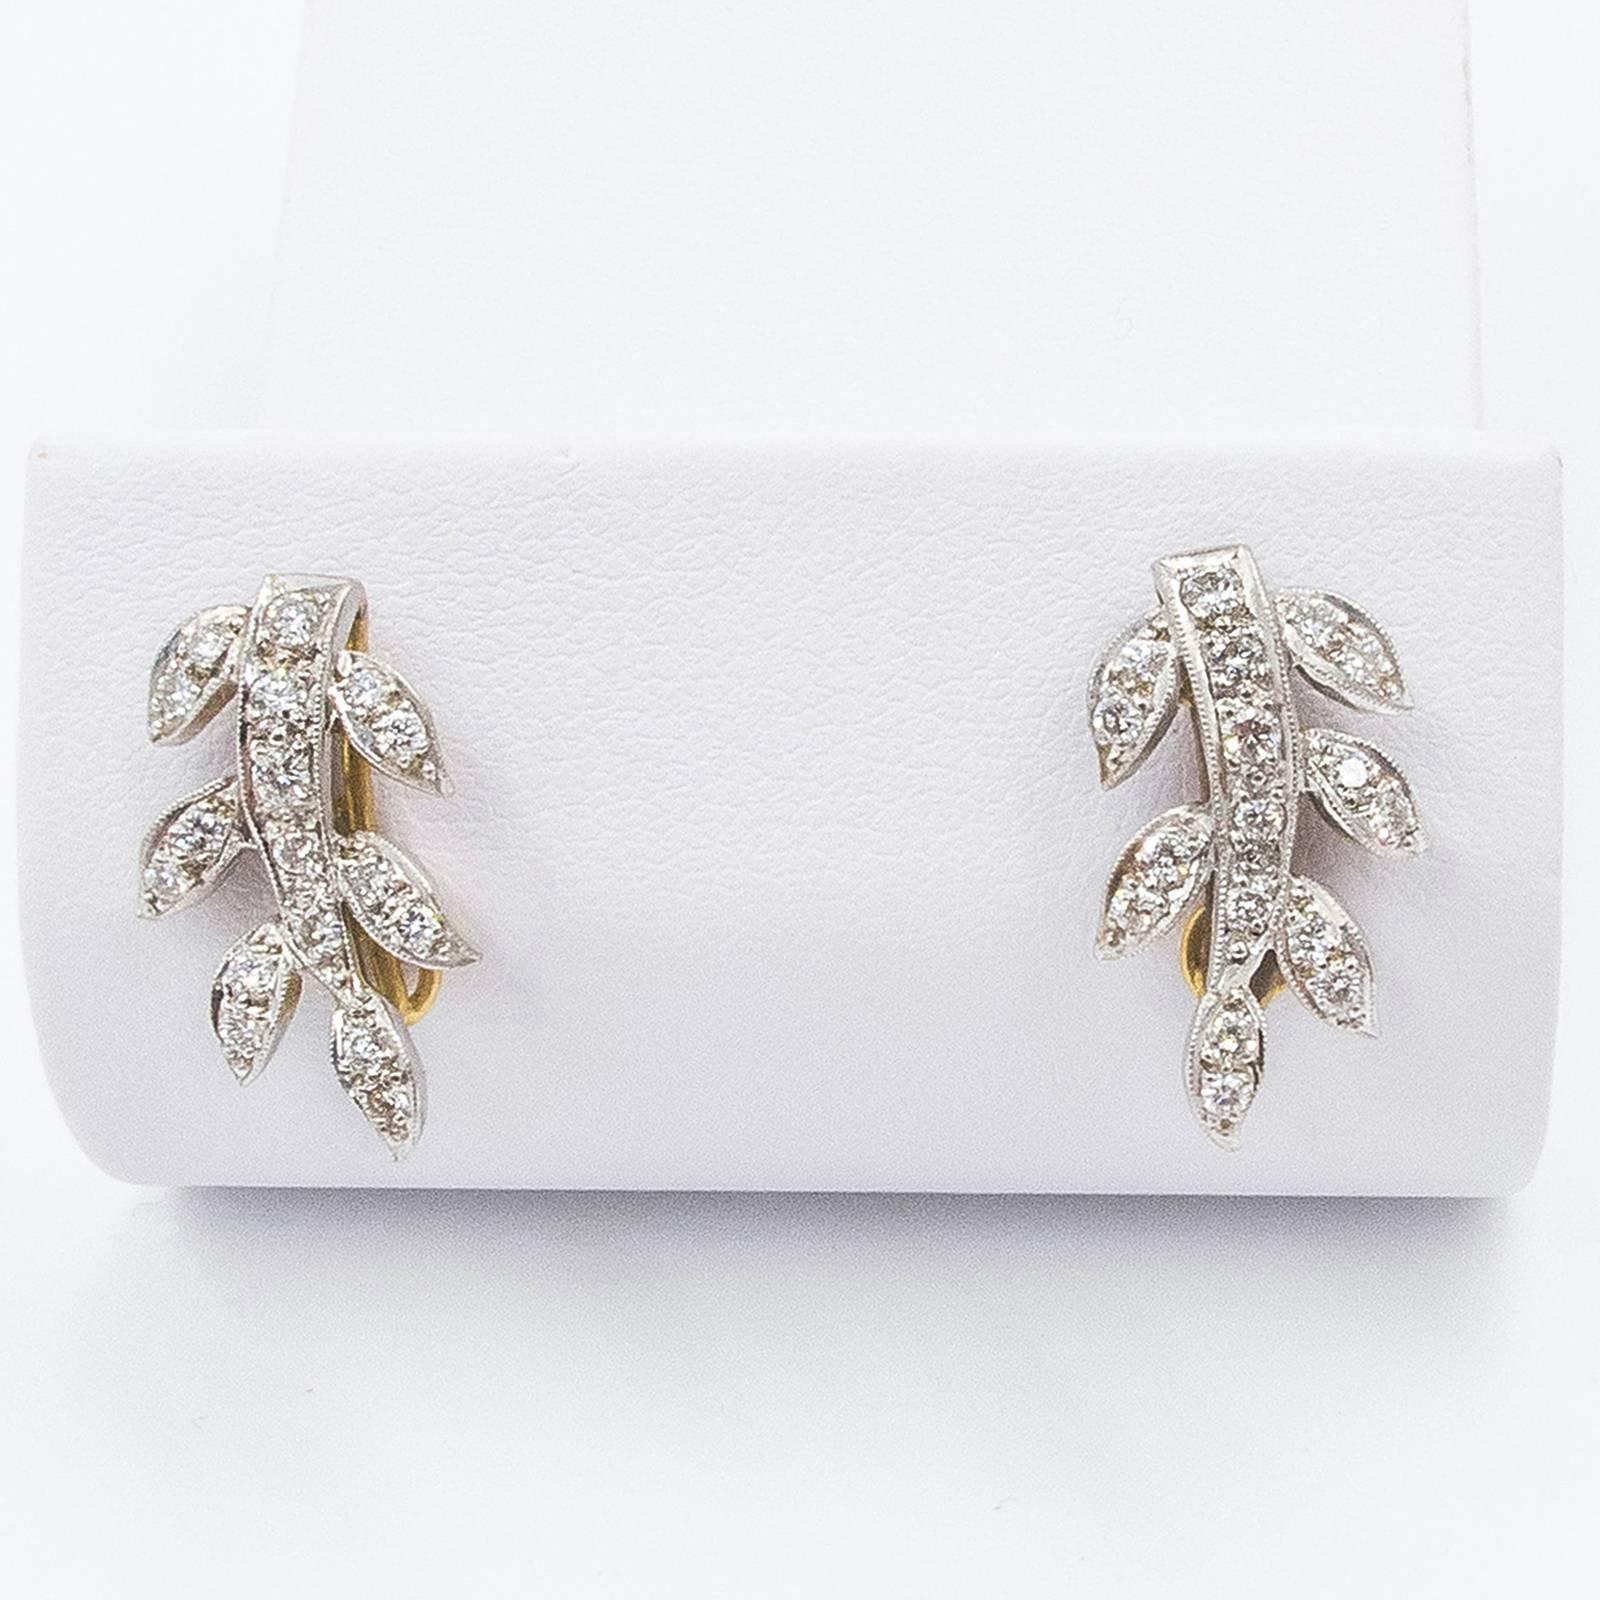 A pretty pair of 18K gold Art Deco Diamond Gold Earrings are set with 34 round, Brilliant Cut Diamonds in the form of open leaves on a vine. Designed to drop slightly below the bottom of the lobes from top mounted post and disc hangers.

Perfectly